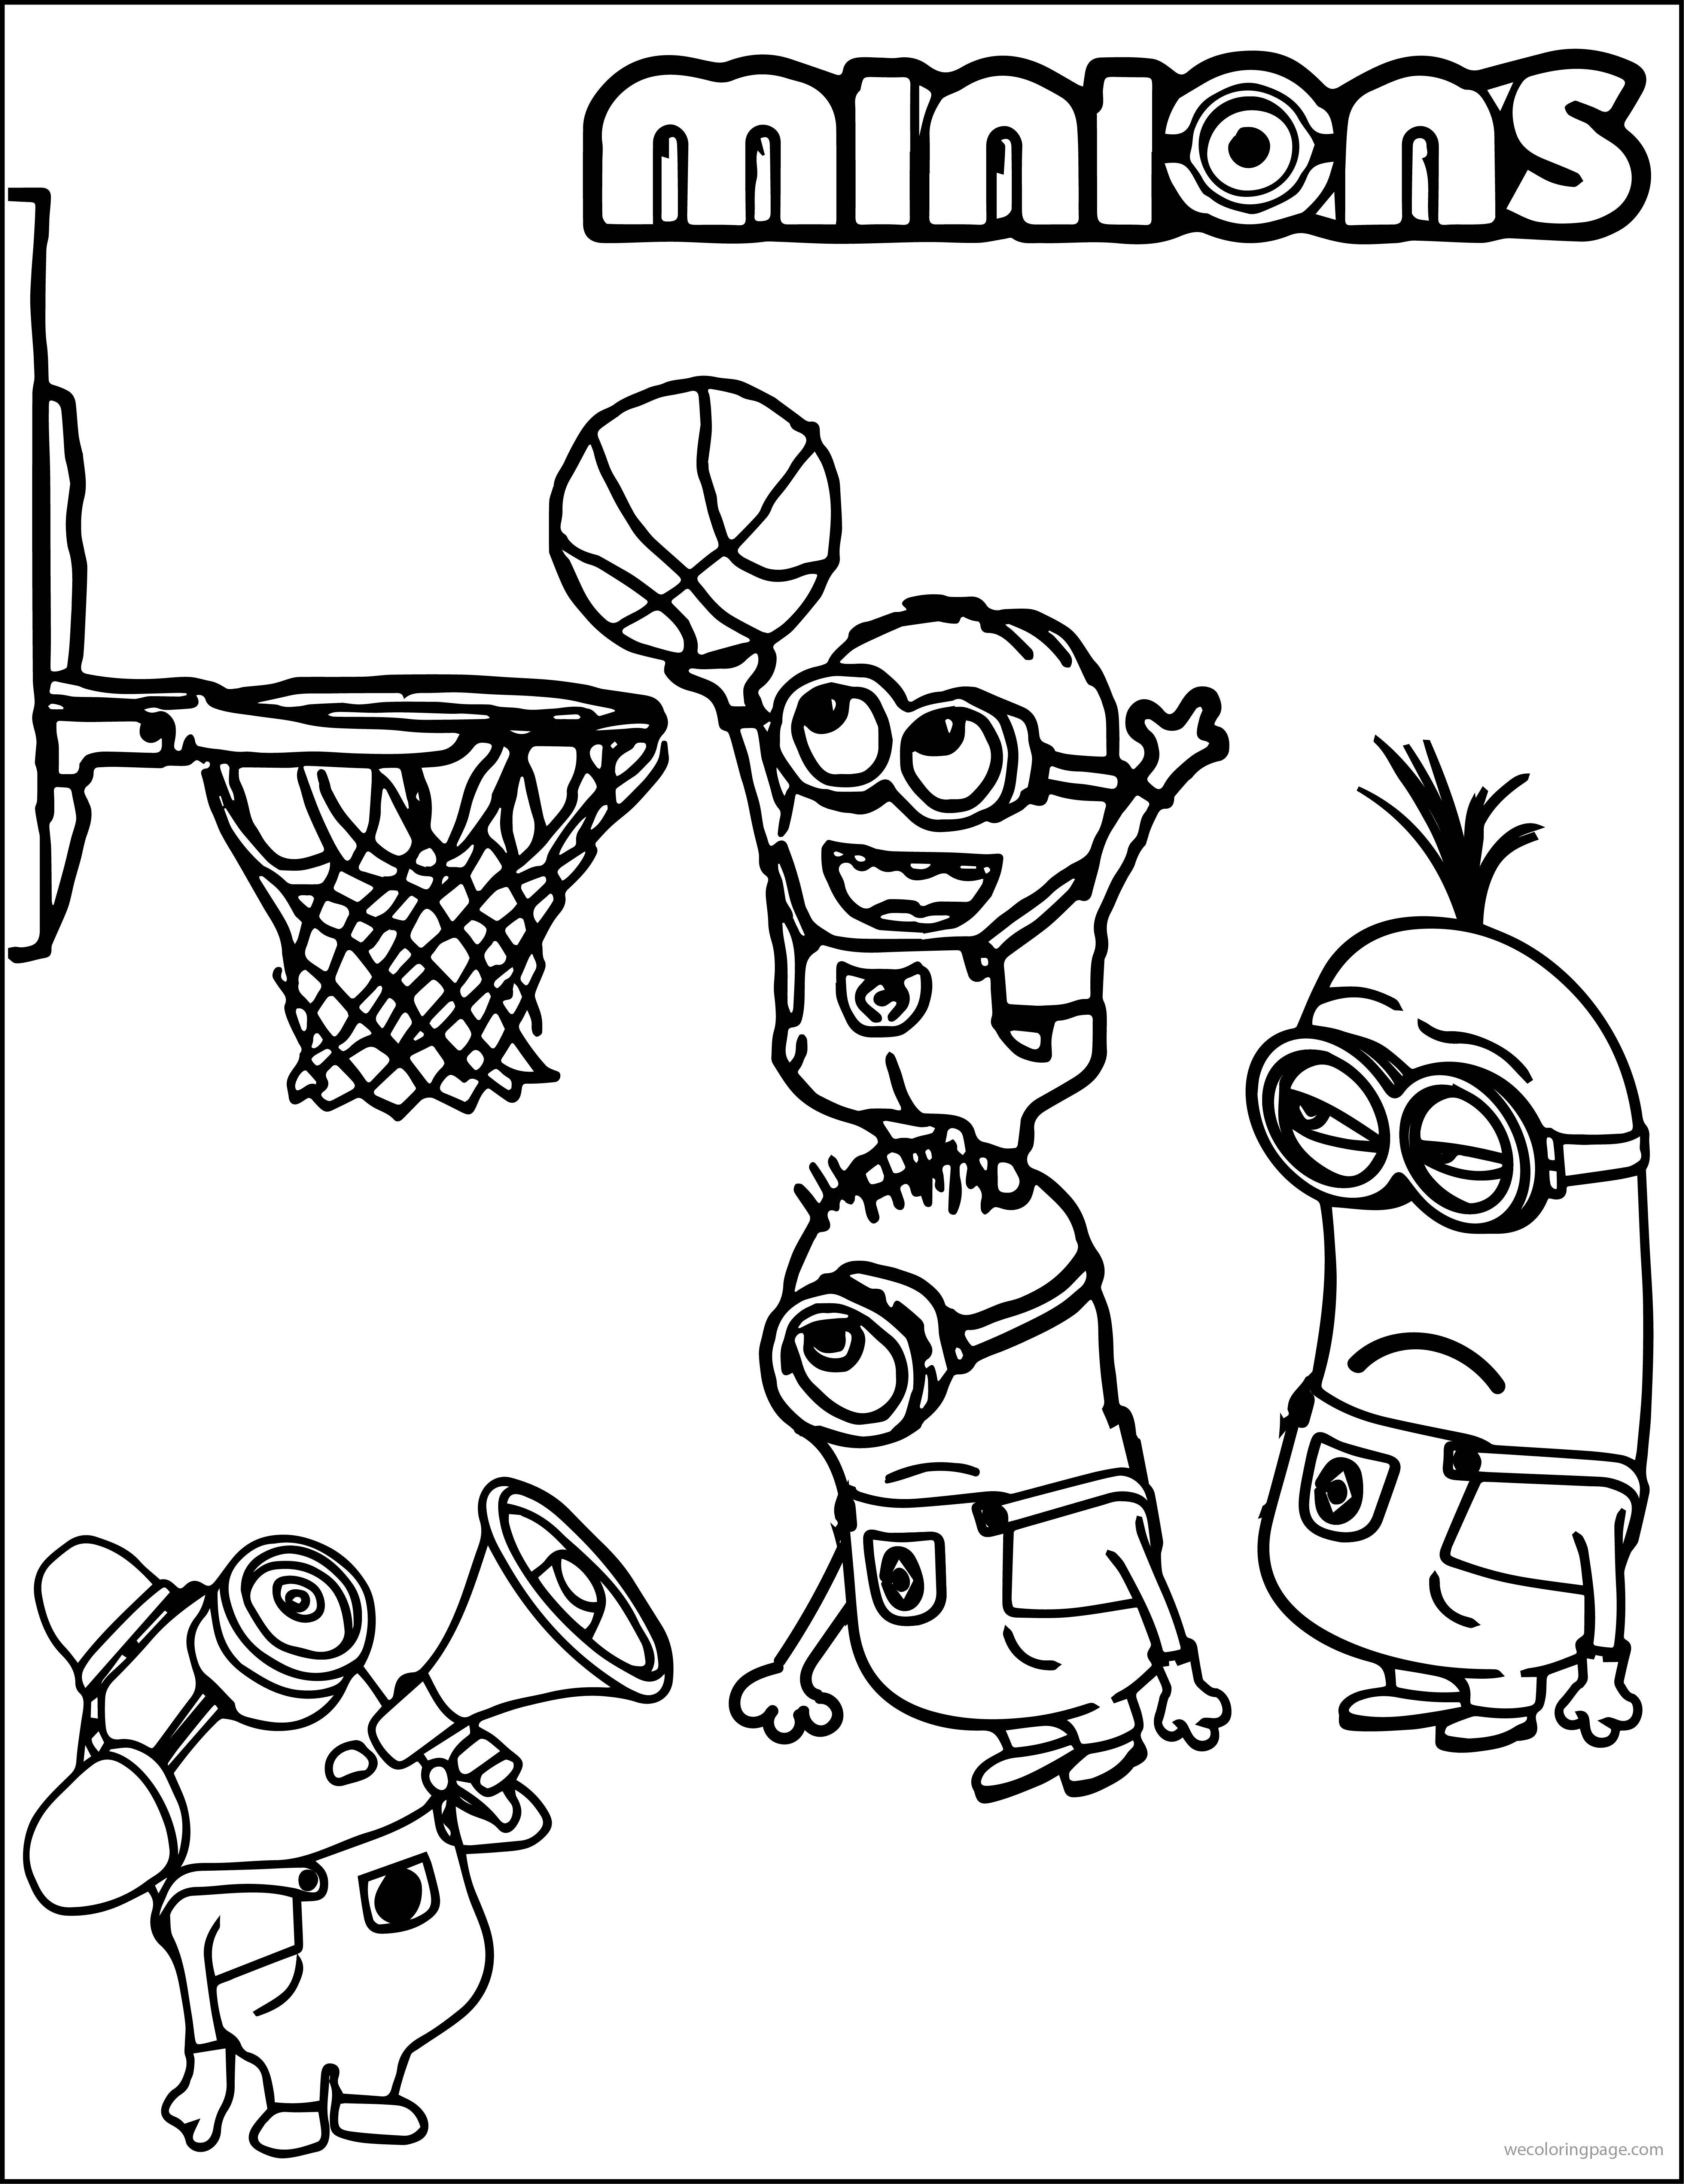 Basketball Coloring Book
 Minion Playing Basketball Coloring Pages